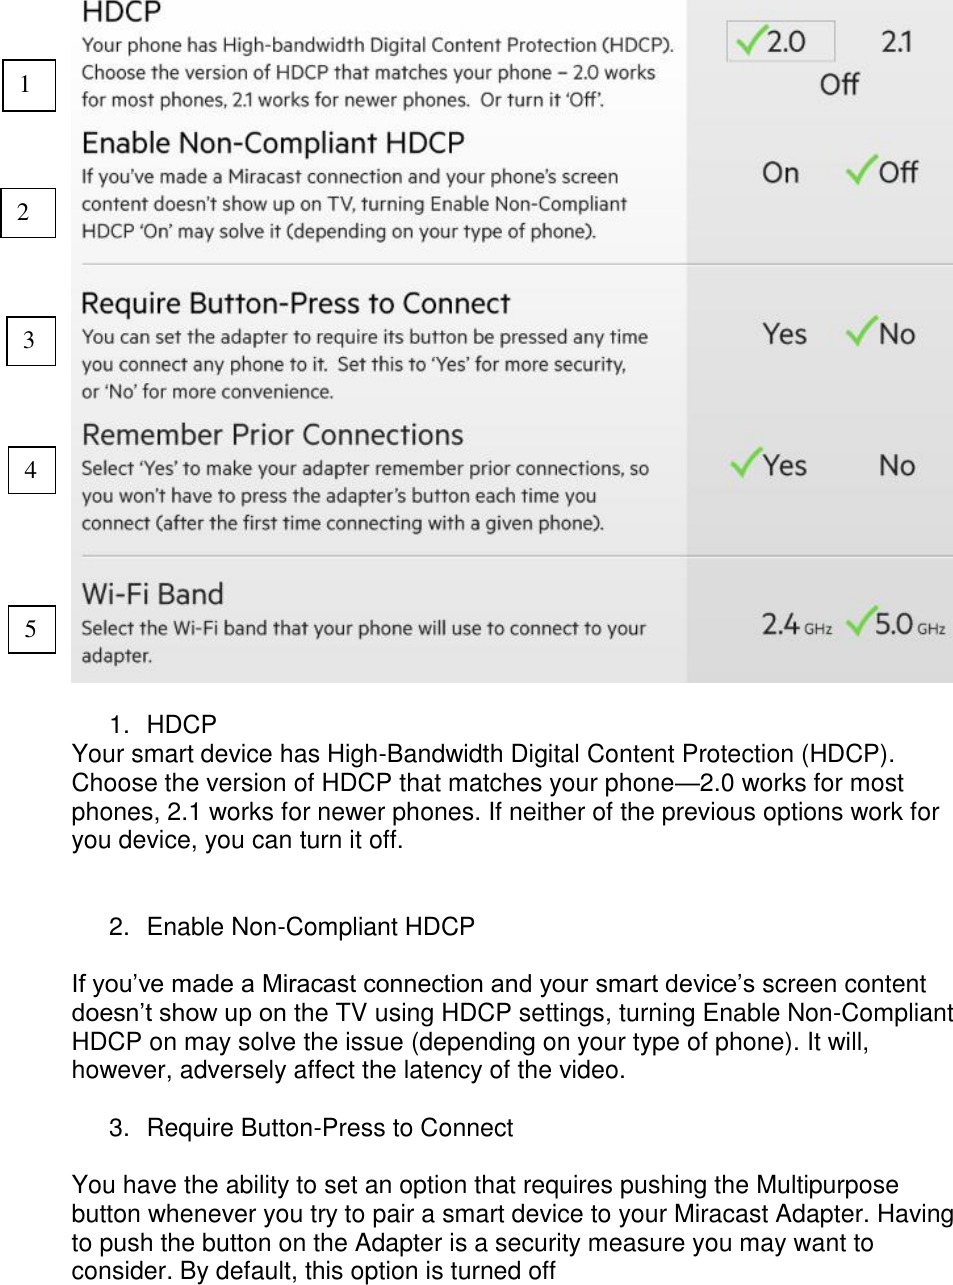    1. HDCP Your smart device has High-Bandwidth Digital Content Protection (HDCP). Choose the version of HDCP that matches your phone—2.0 works for most phones, 2.1 works for newer phones. If neither of the previous options work for you device, you can turn it off.   2.  Enable Non-Compliant HDCP  If you’ve made a Miracast connection and your smart device’s screen content doesn’t show up on the TV using HDCP settings, turning Enable Non-Compliant HDCP on may solve the issue (depending on your type of phone). It will, however, adversely affect the latency of the video.  3.  Require Button-Press to Connect  You have the ability to set an option that requires pushing the Multipurpose button whenever you try to pair a smart device to your Miracast Adapter. Having to push the button on the Adapter is a security measure you may want to consider. By default, this option is turned off  1 2 3 4 5 